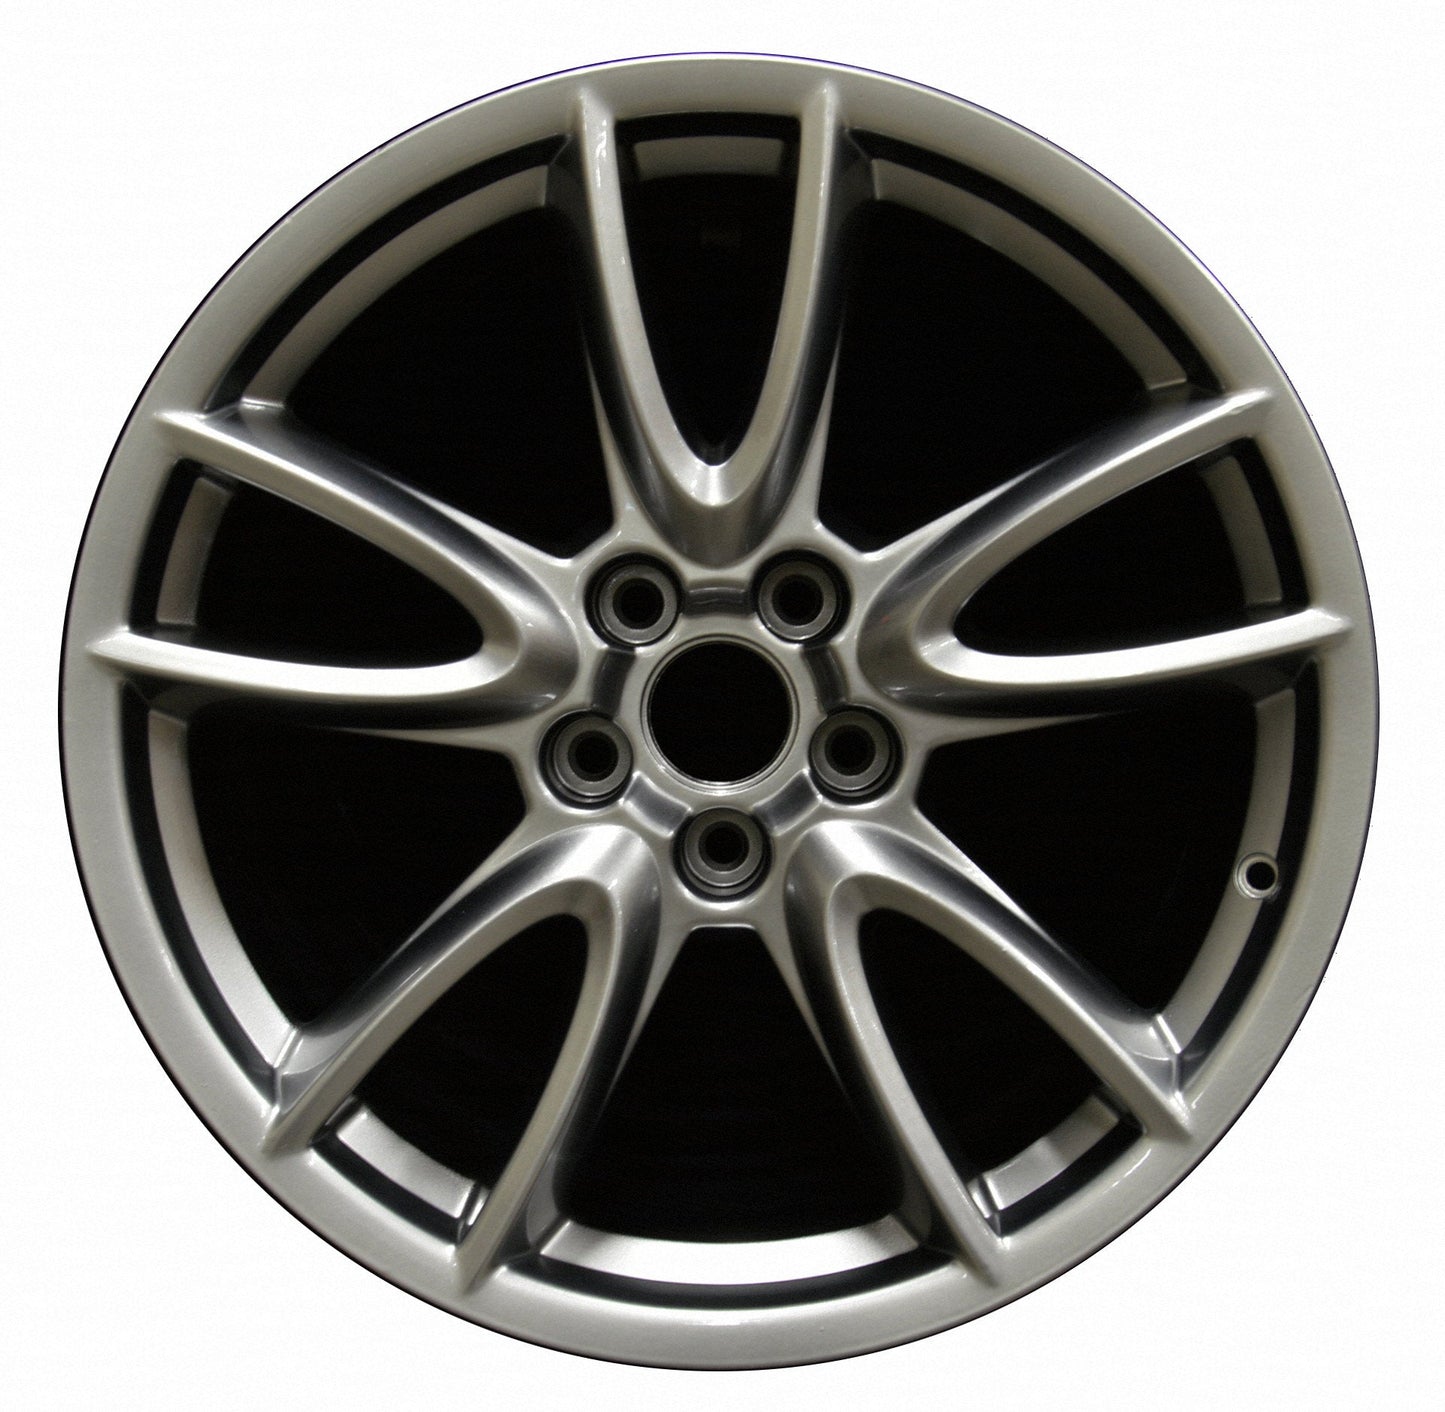 Ford Mustang  2011, 2012, 2013, 2014 Factory OEM Car Wheel Size 19x9 Alloy WAO.3862.LS100V3.FFBRT